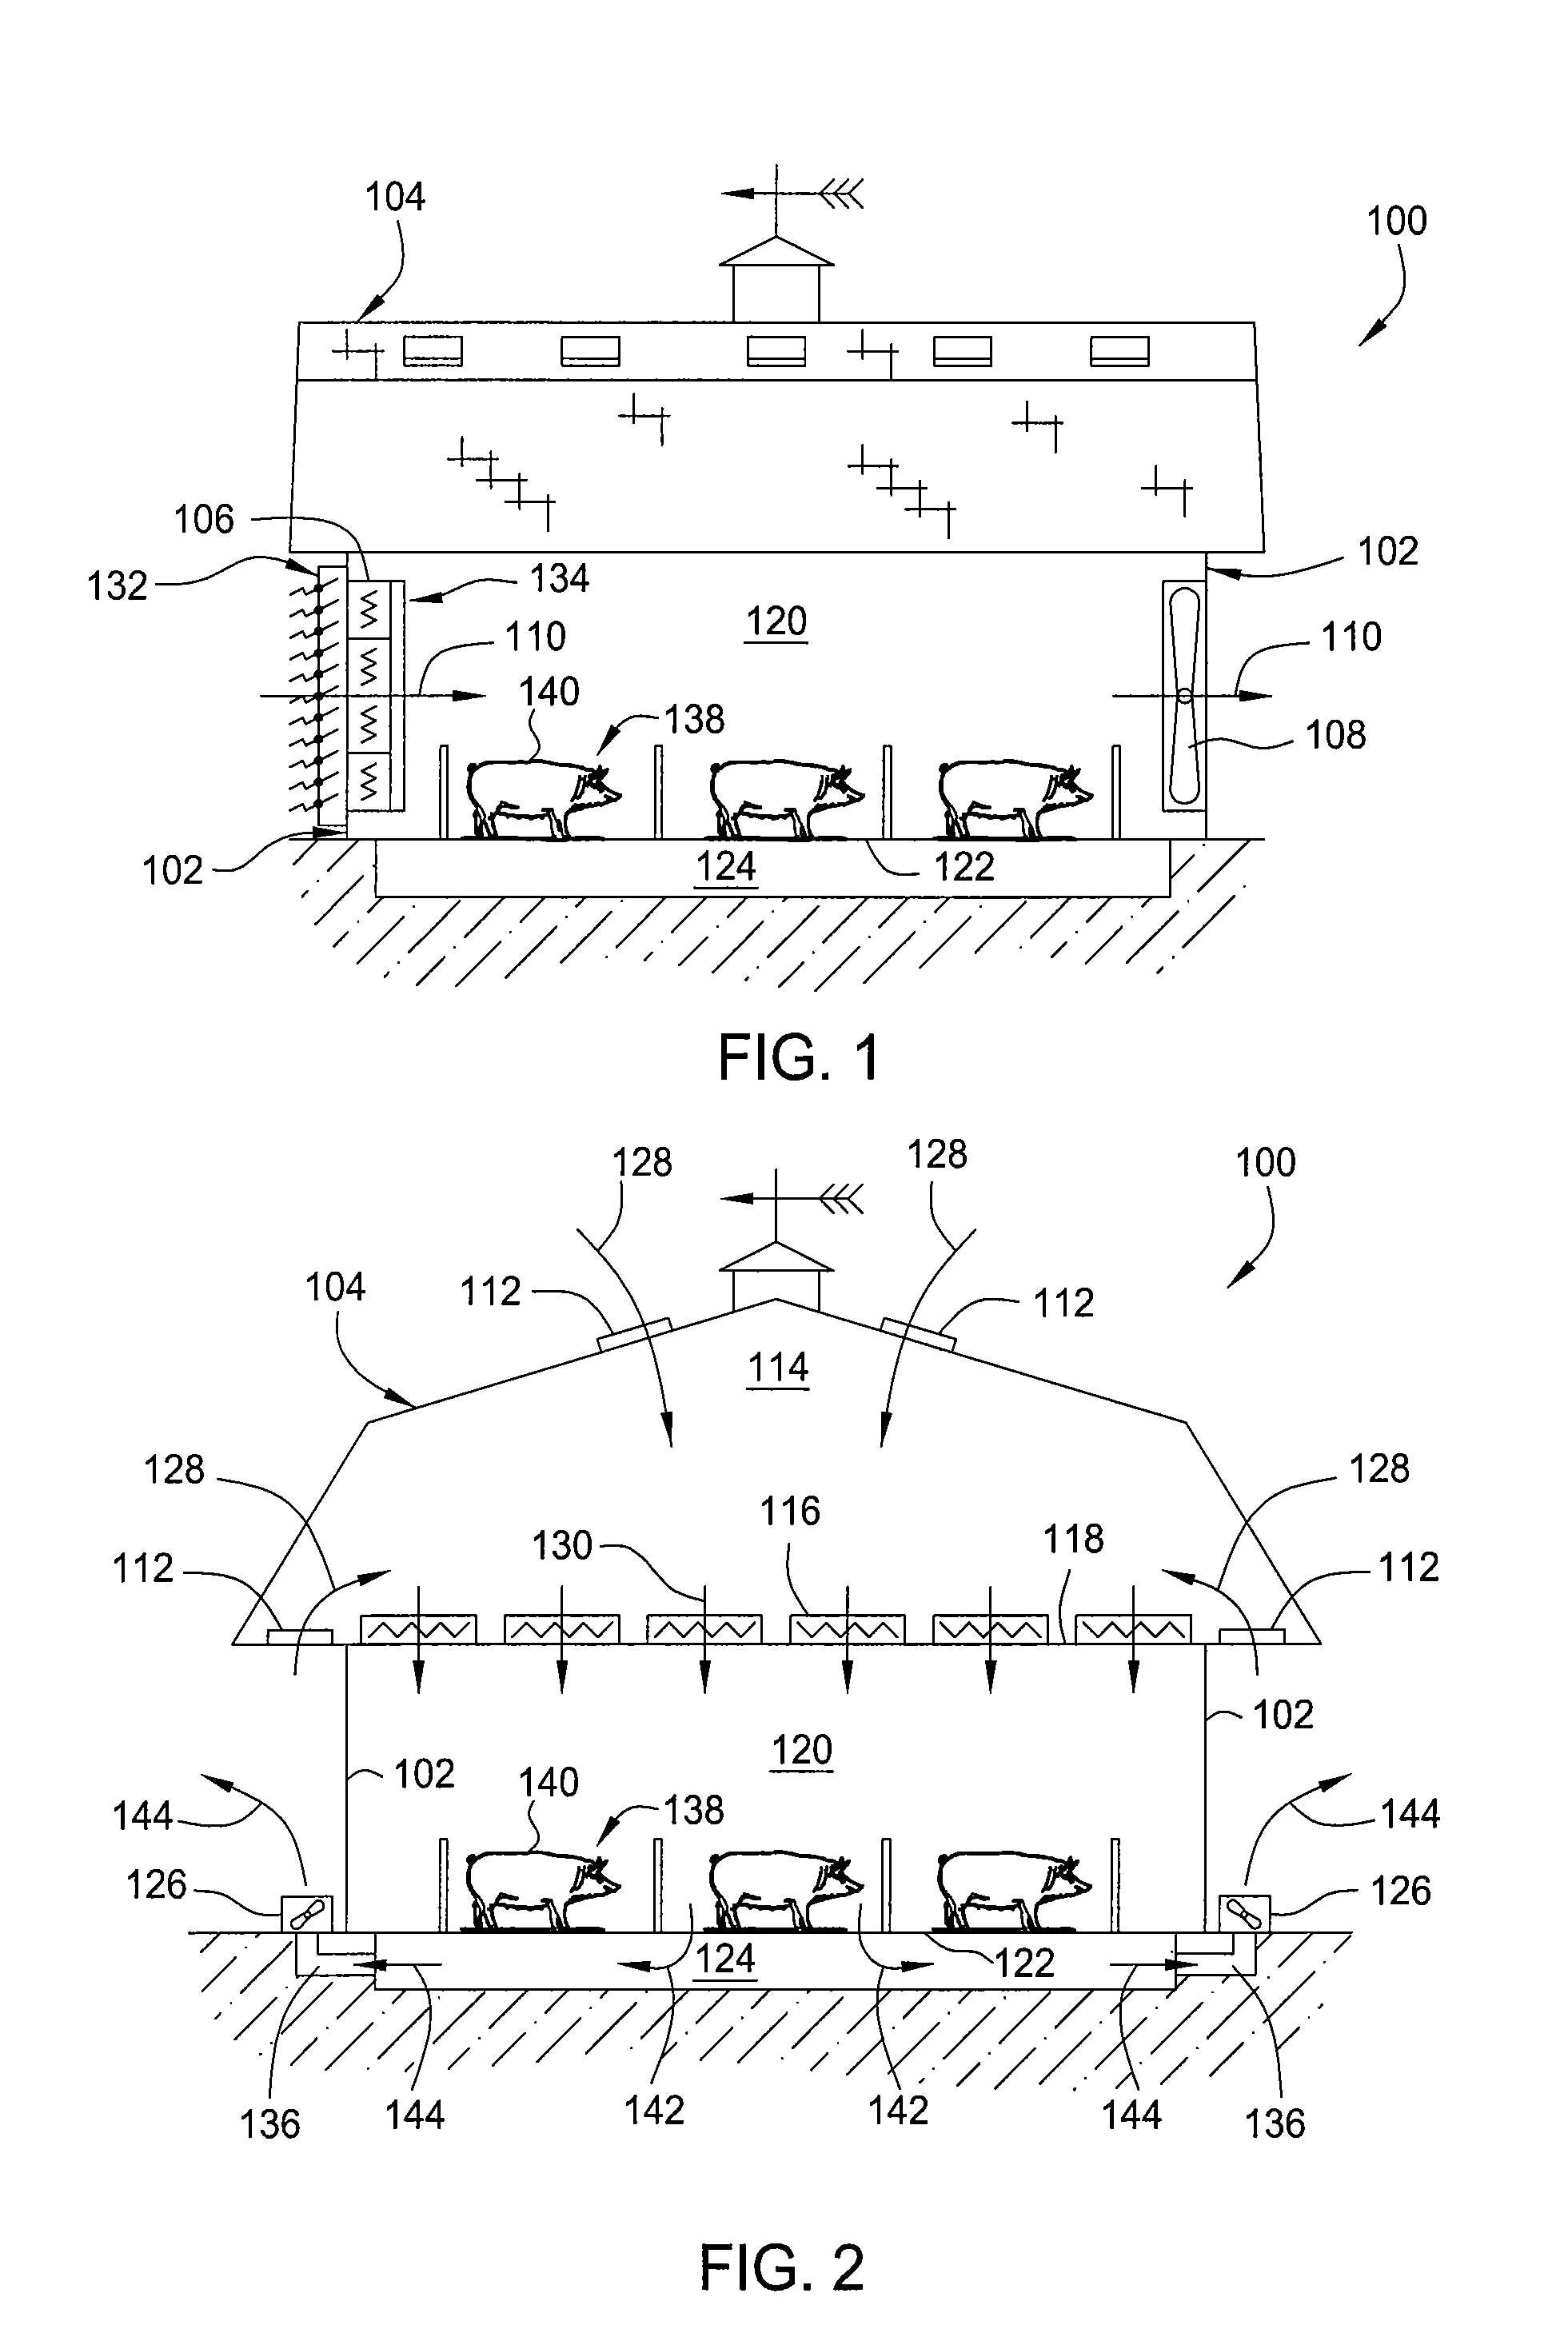 Method and apparatus for providing clean air to animal enclosures